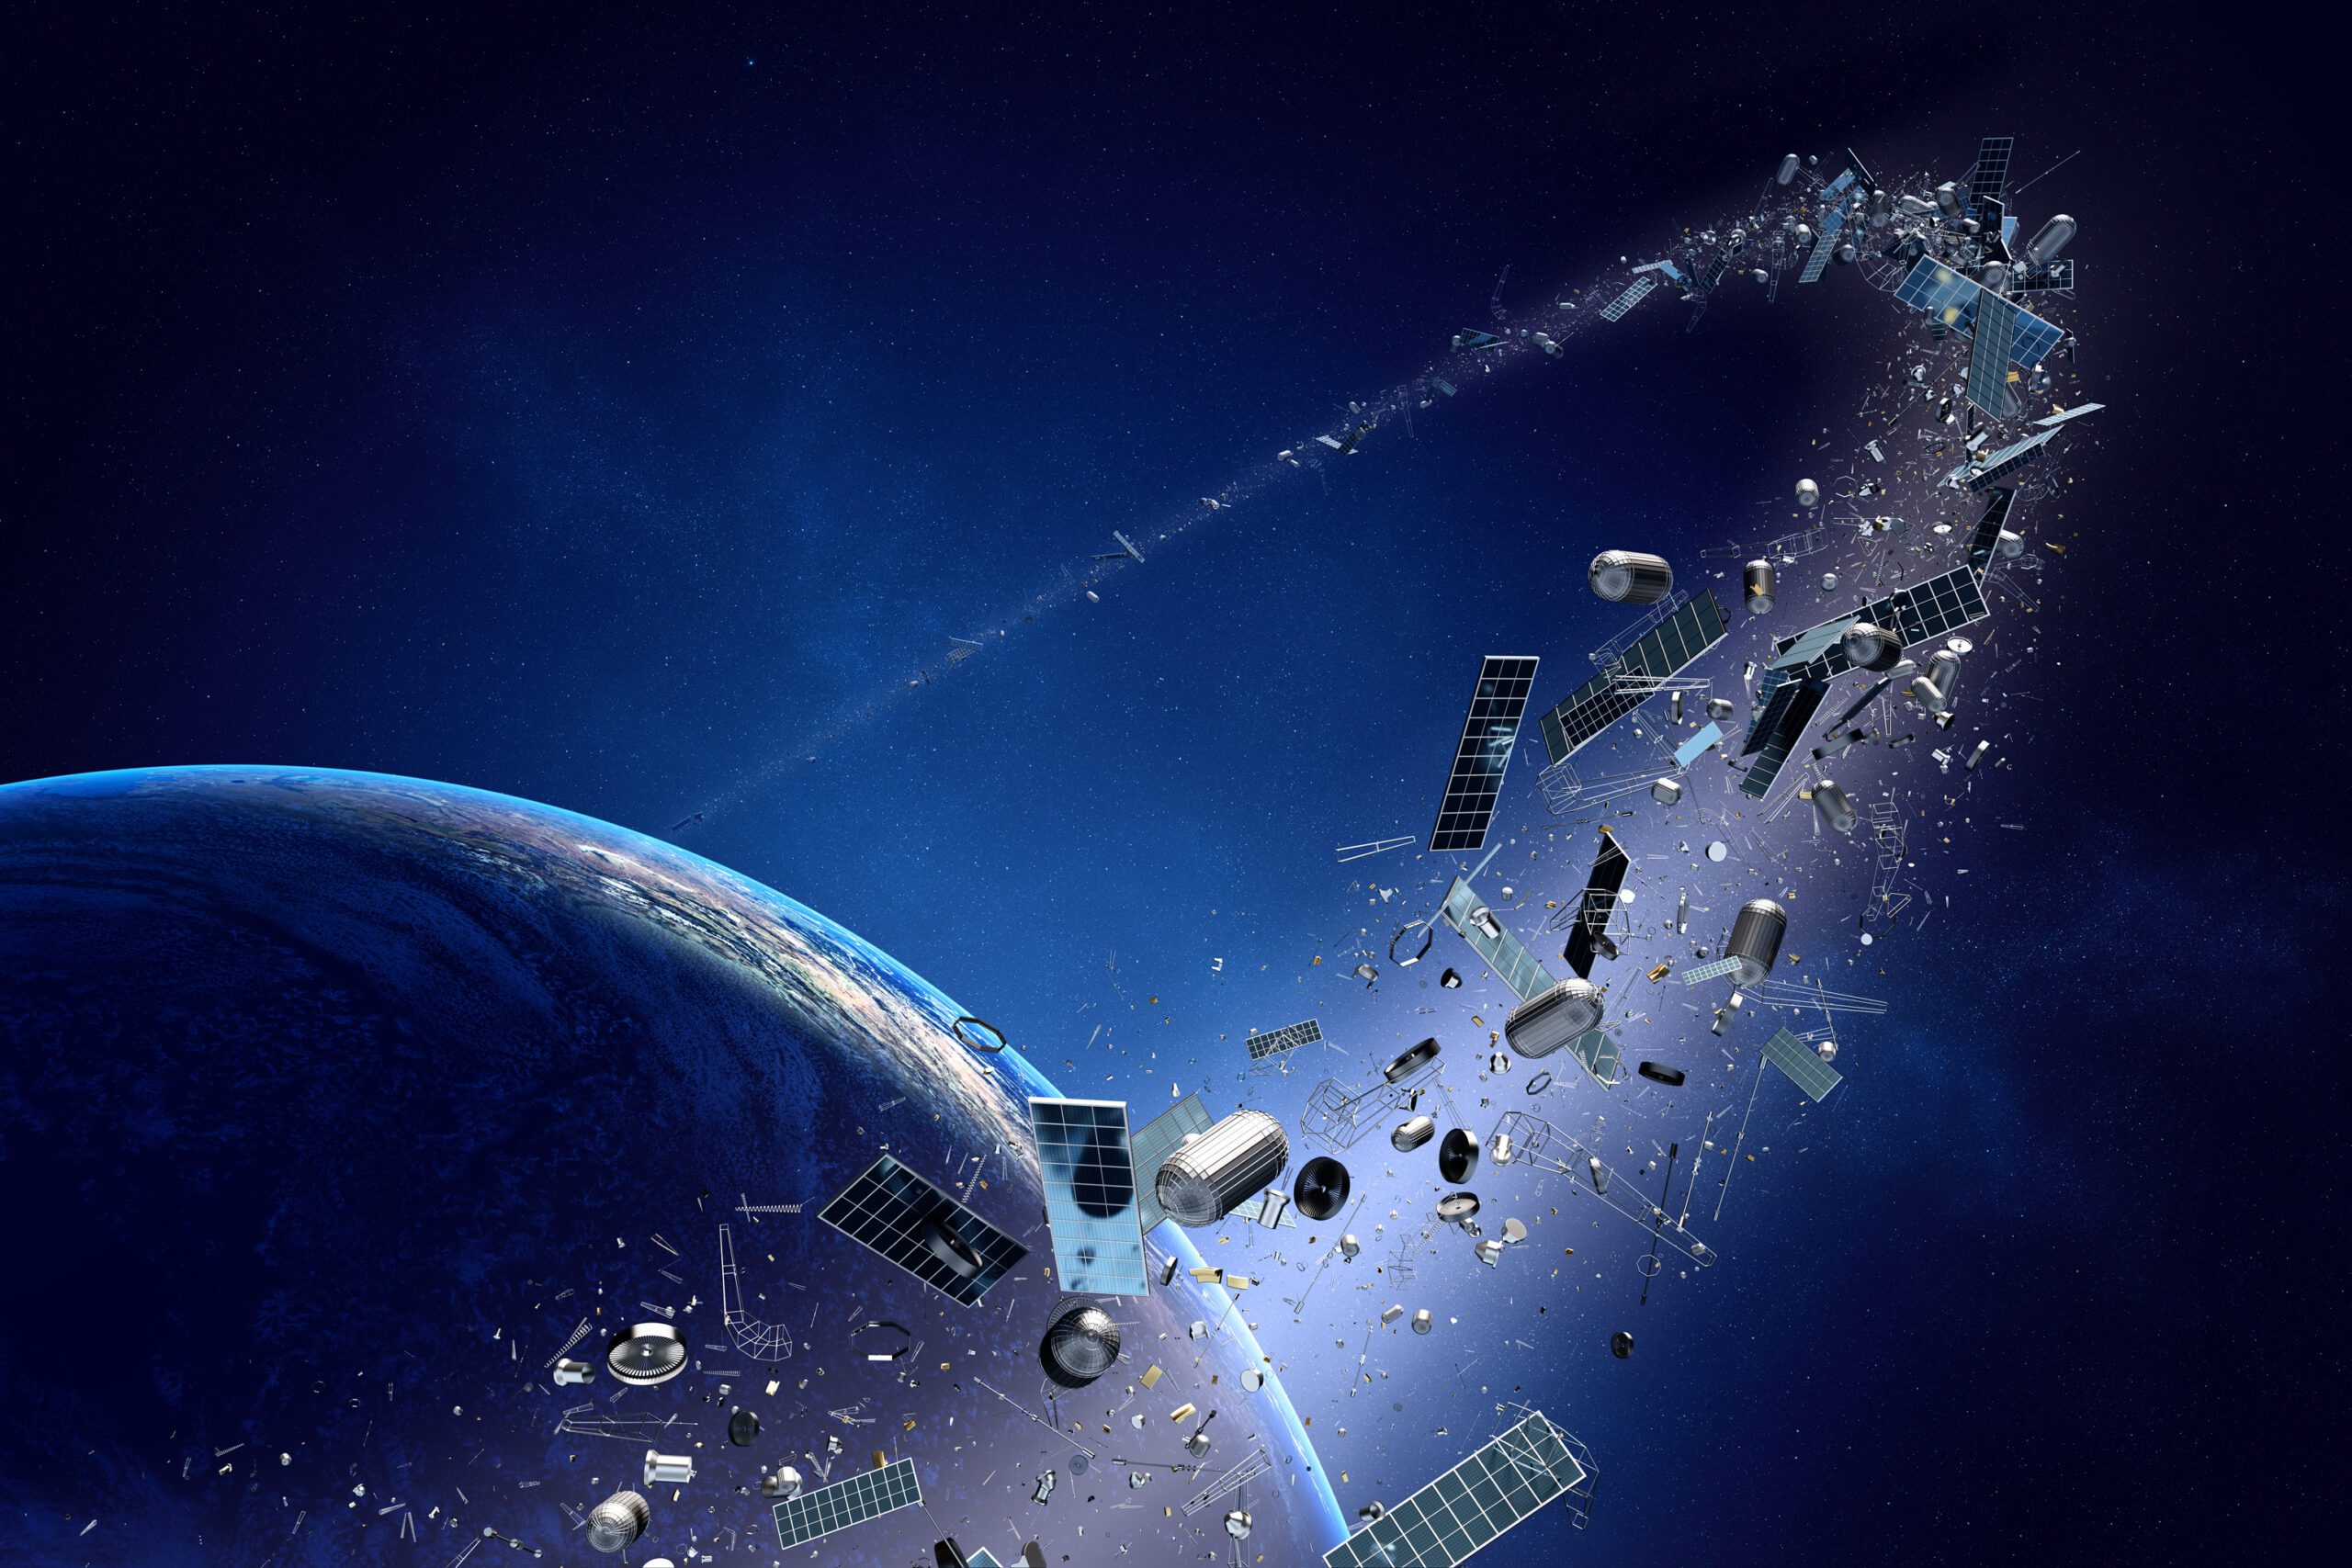 A concept image of space debris flying around Earth.